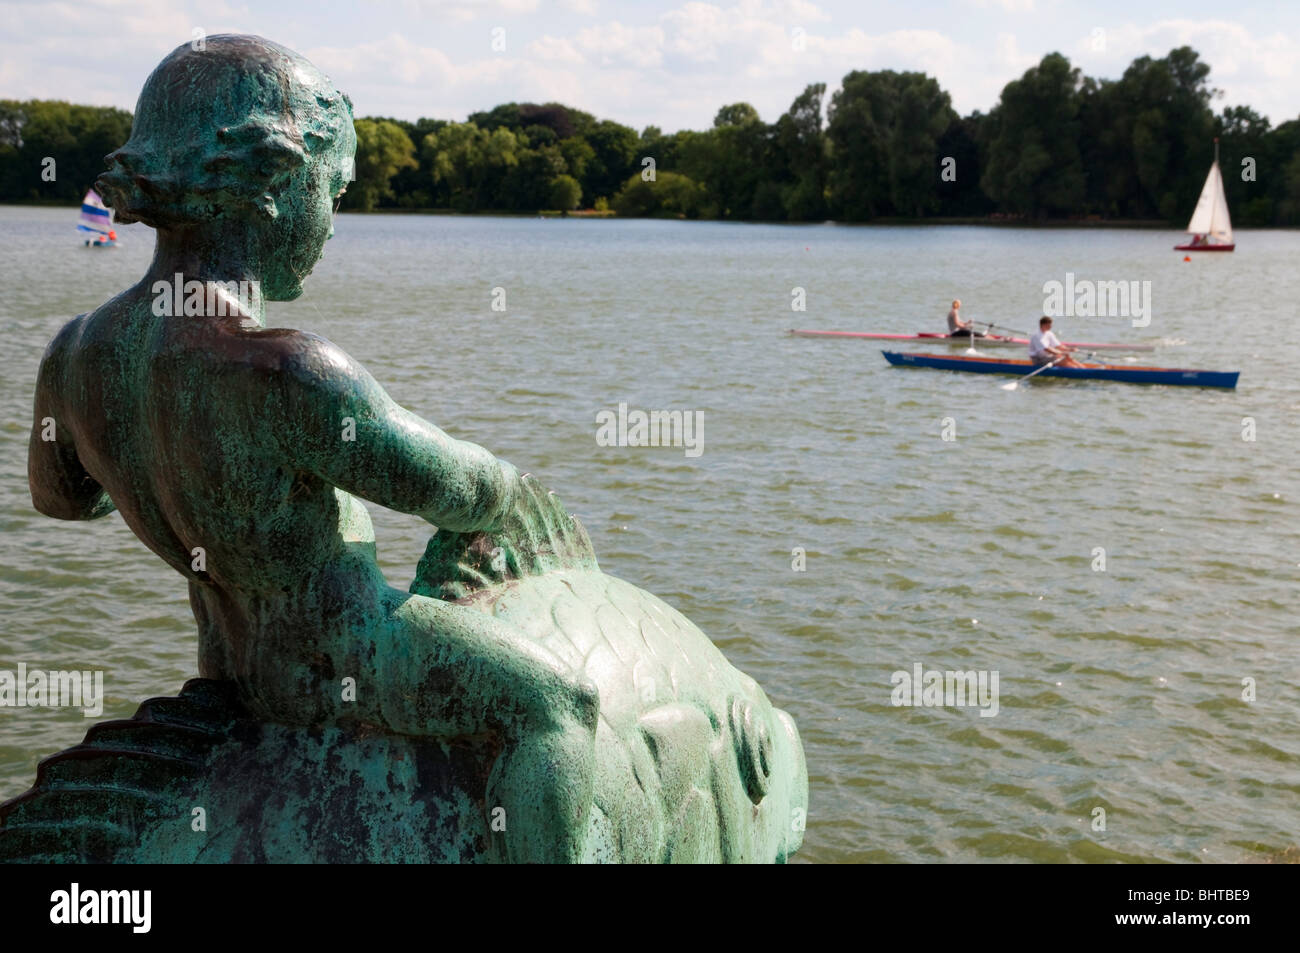 Hannover, Masch Lake, putto on the fish, sculpture from 1936, Germany Stock Photo